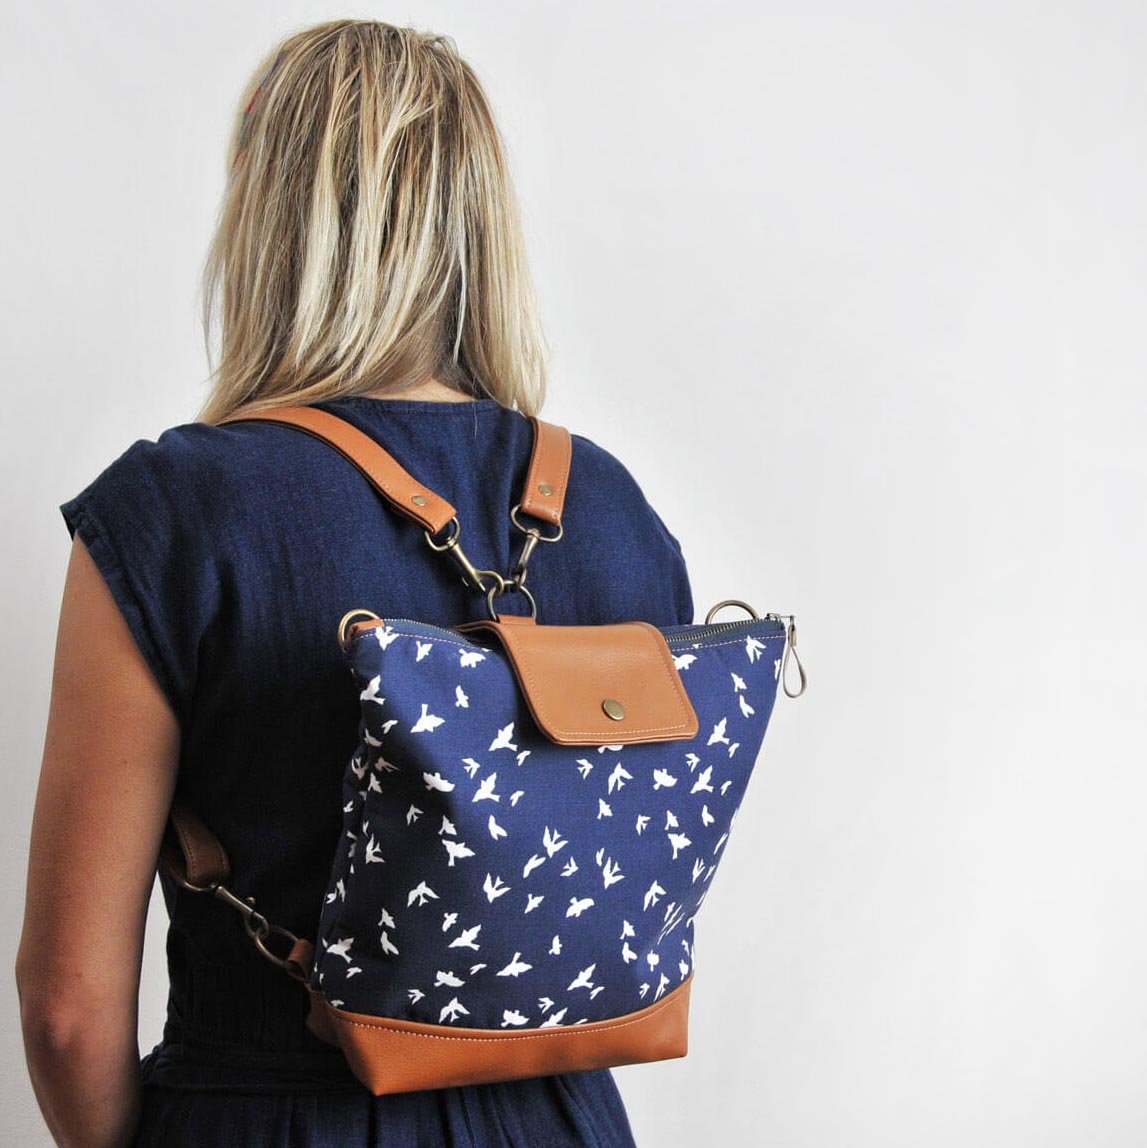 Recycled leather convertible backpack in navy bird fabric by Lauren Holloway, sustainable bags and accessories handmade in the UK